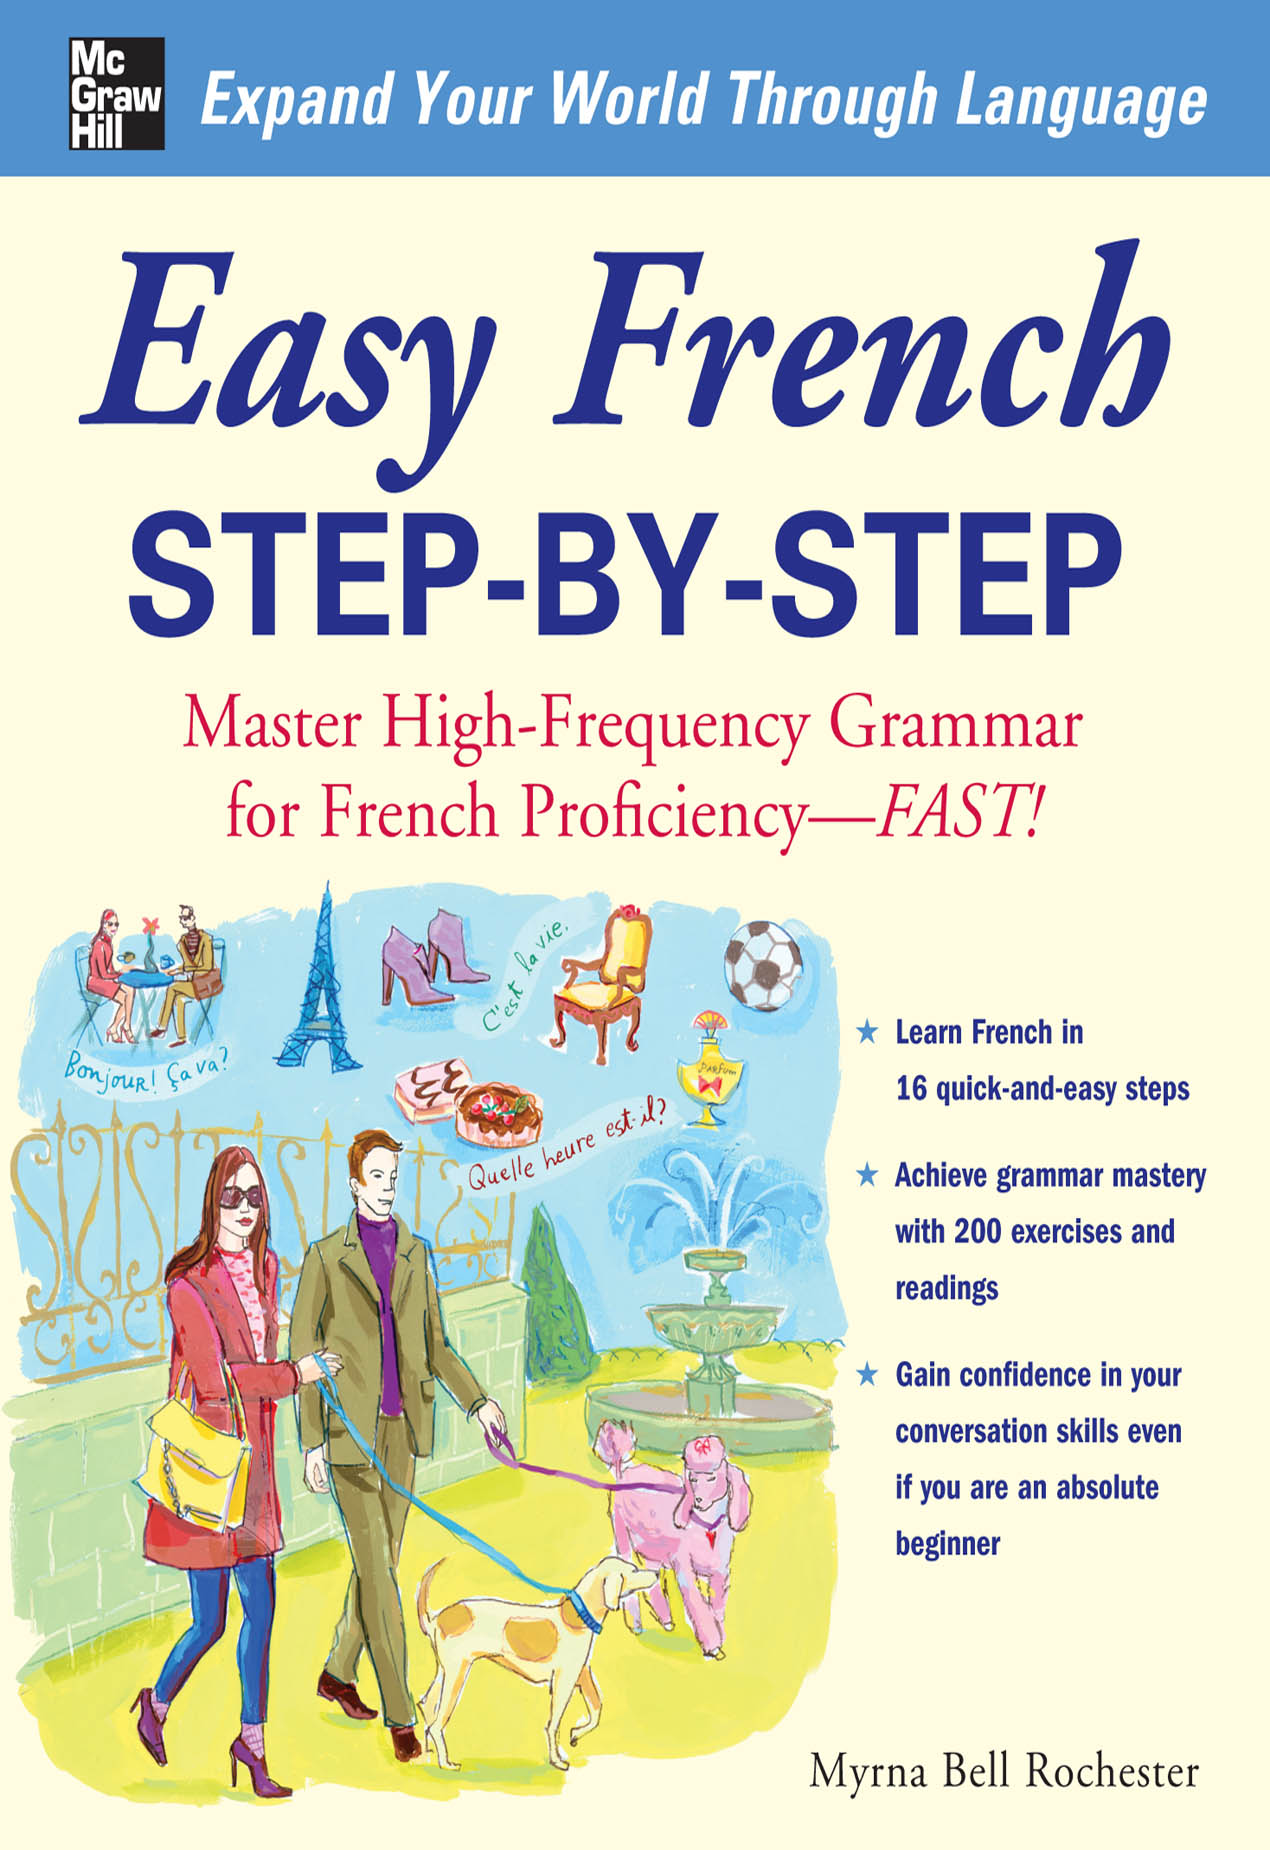 Easy French Step-by-Step - 10-14.99